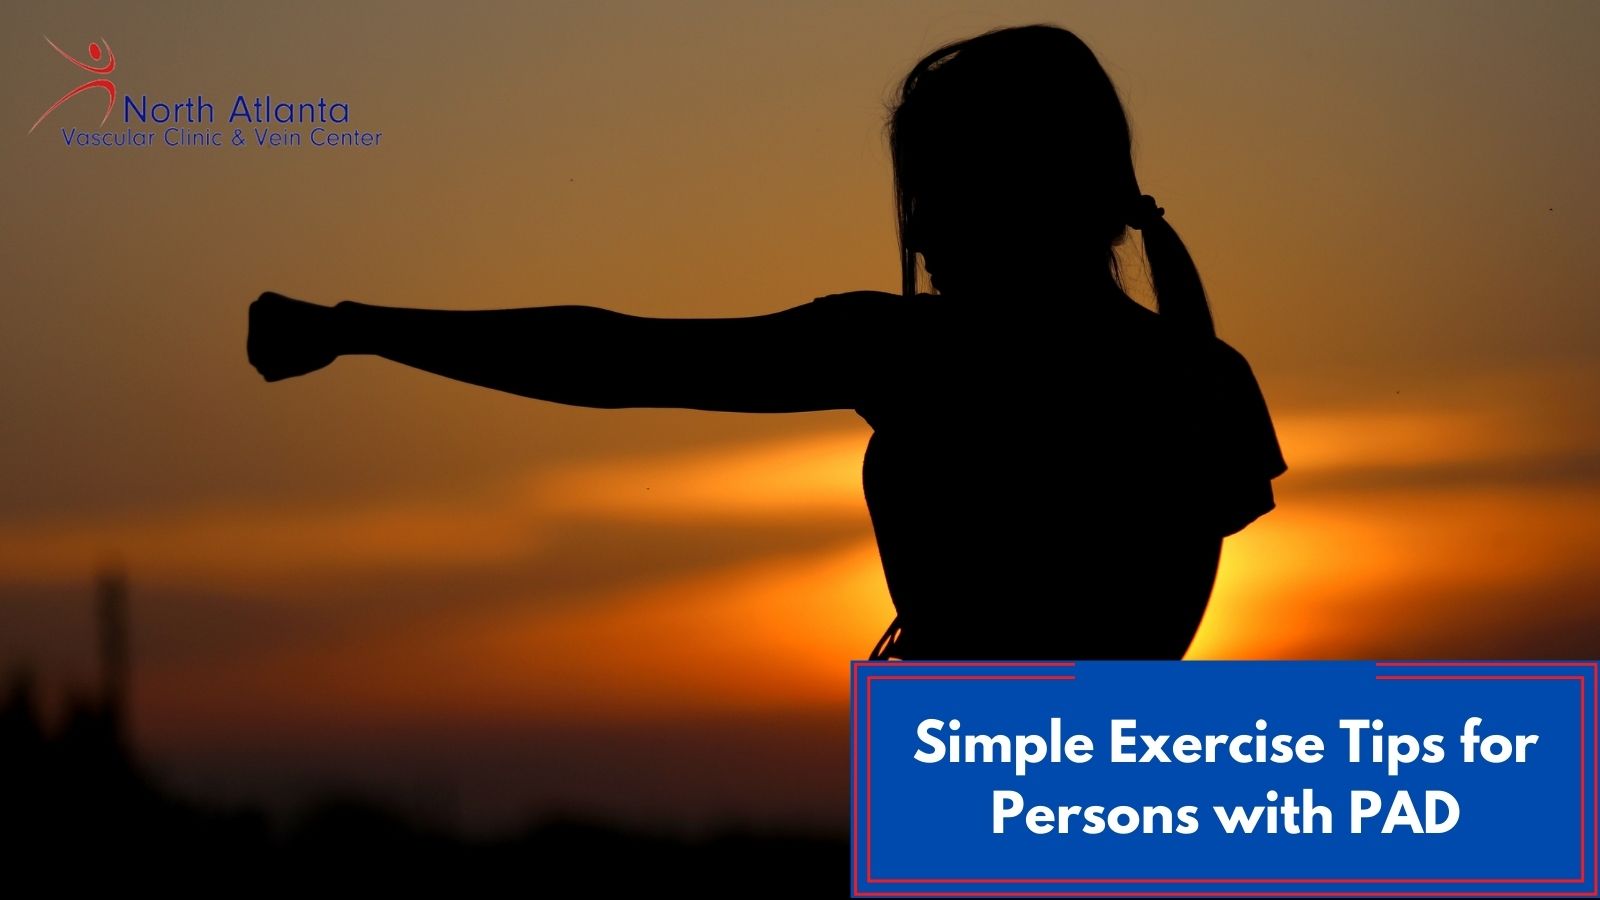 Simple Exercise Tips for Persons with PAD